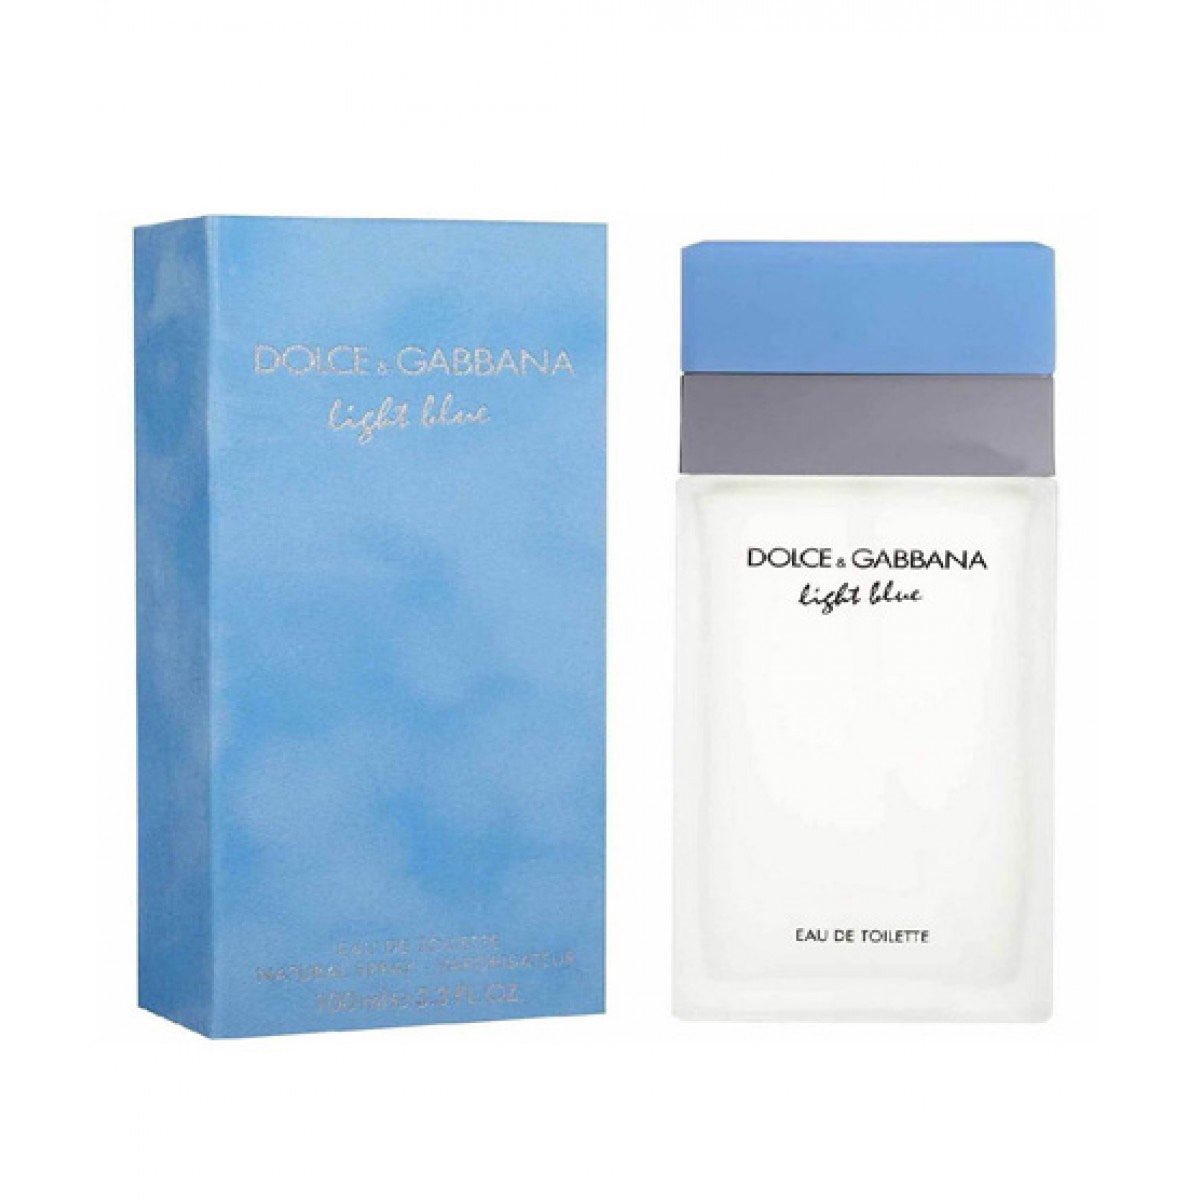 dolce & gabbana light blue for womencitrus, bluebells, a whisper-light hint of rose: misted on your neck, light blue leaves behind a scent that’s just pretty, not perfume-y. no wonder it’s a classic